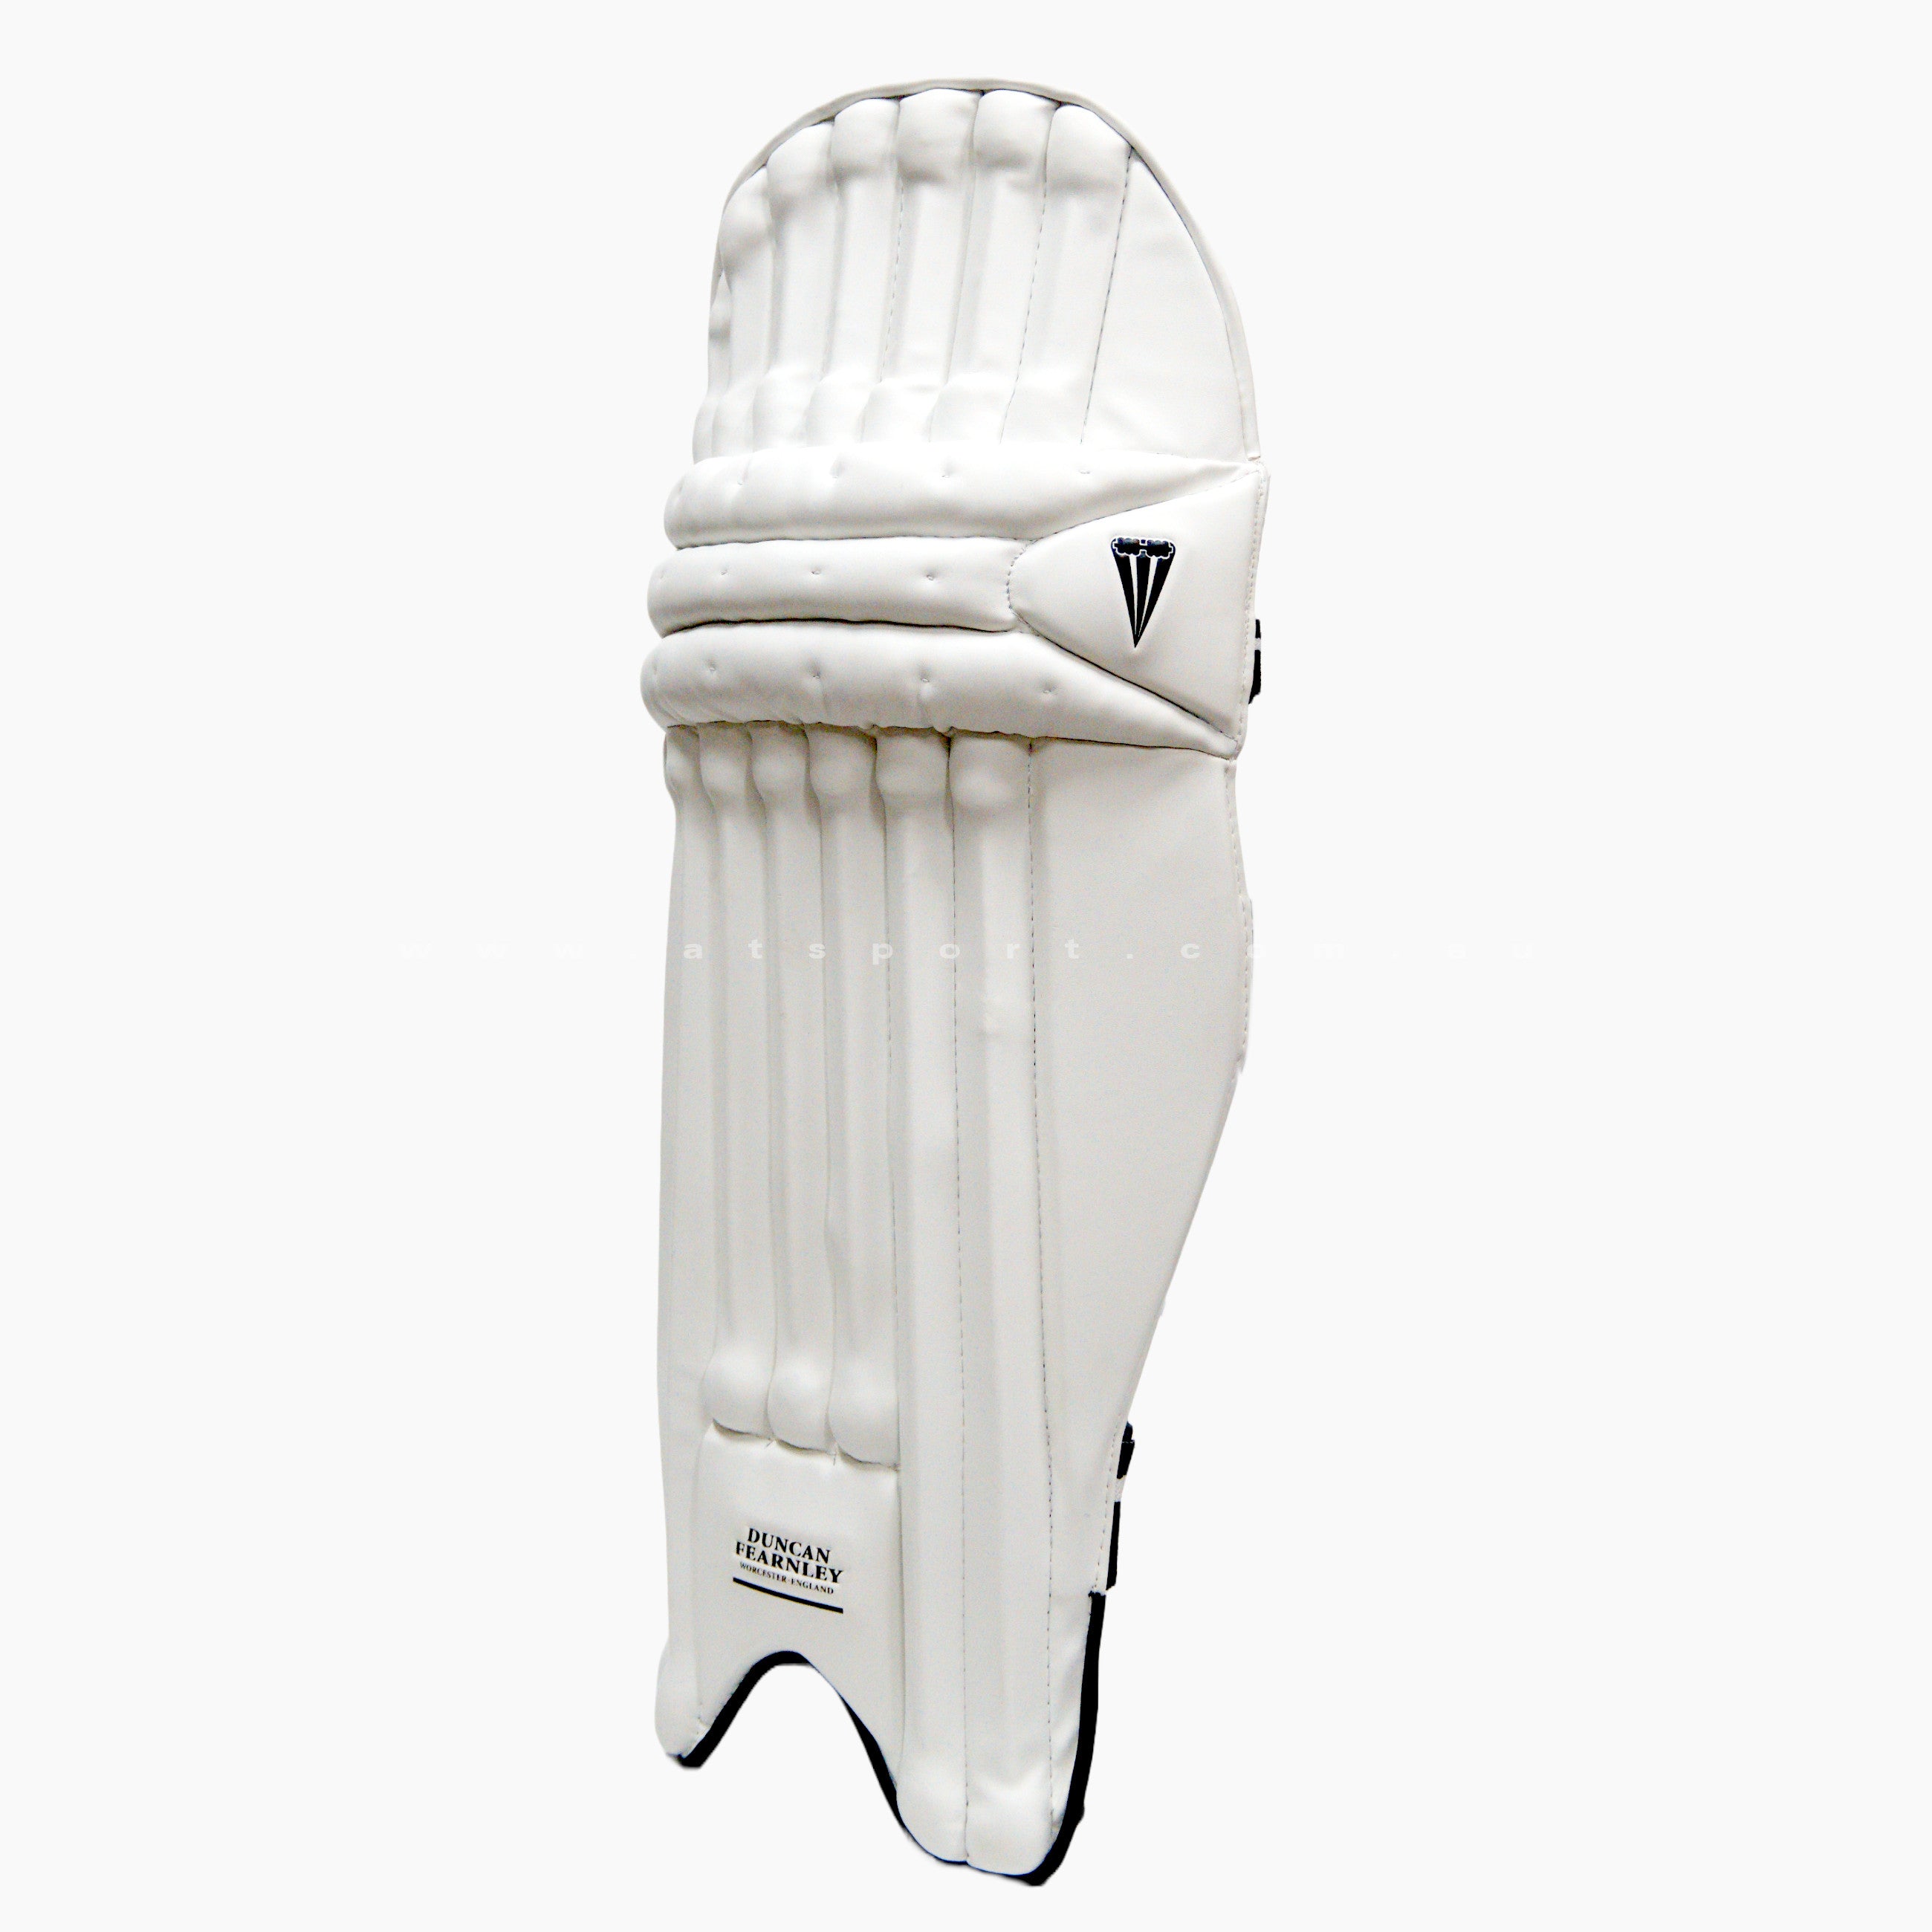 Duncan Fearnley Heritage Cricket Batting Pads - ADULT